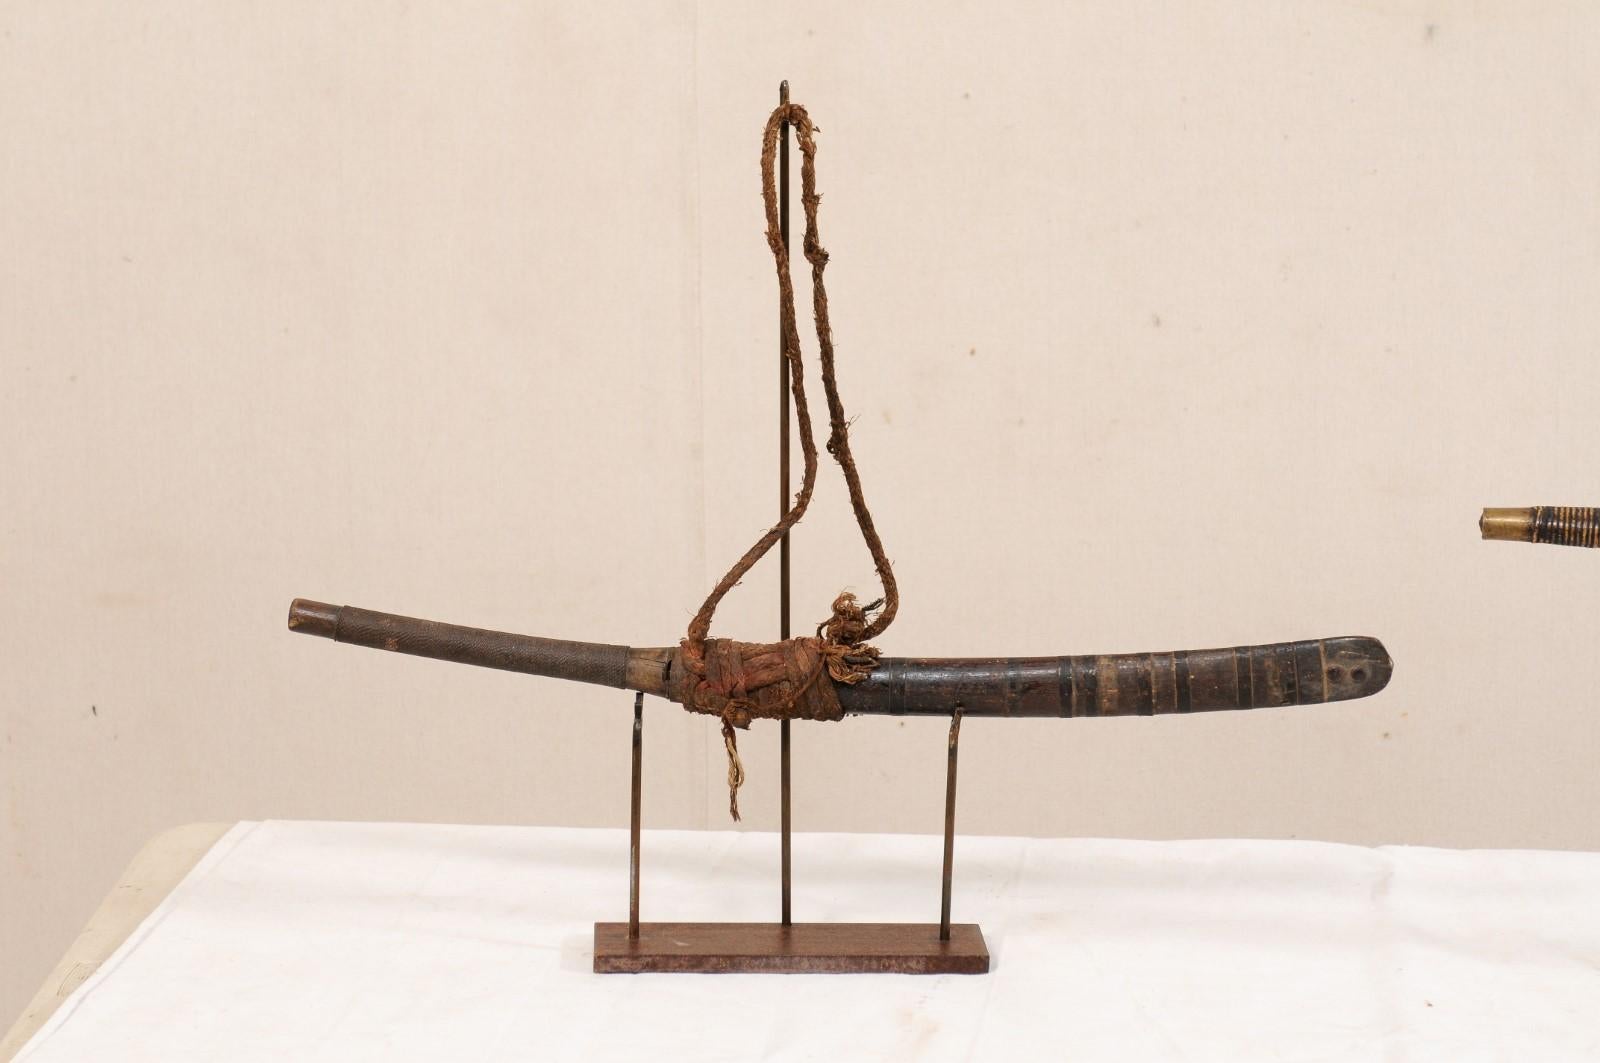 A pair of Laos swords from the late 19th century on custom stands. This pair of antique swords from Laos, often referred to as a daab or dha, were quick commonly hung by the front door of households throughout Southeast Asia, were often decorated